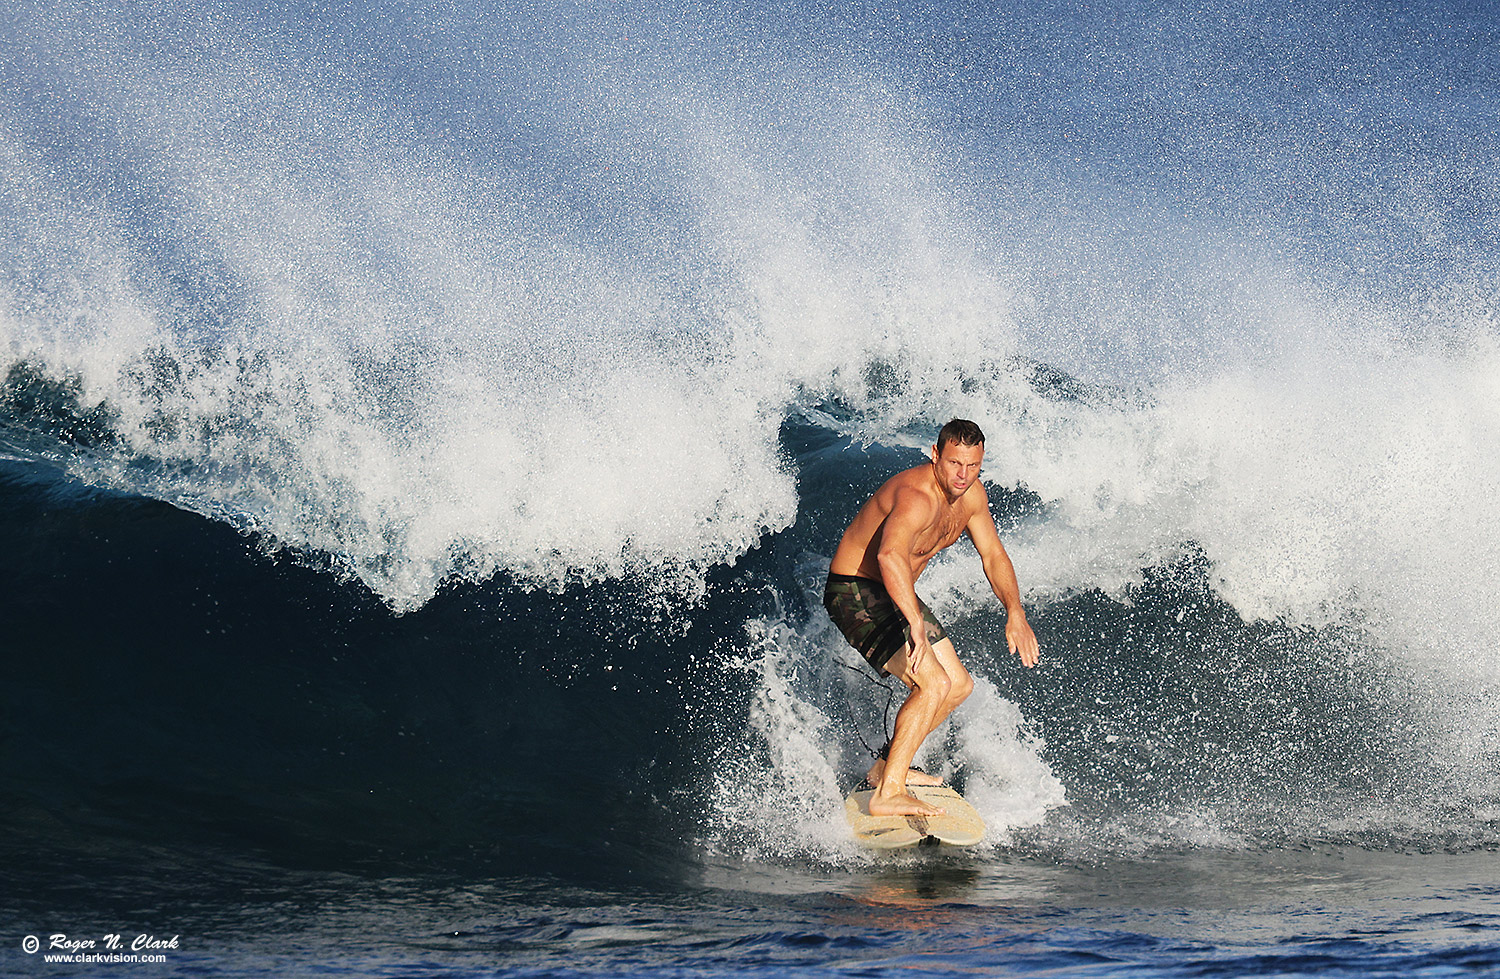 image surfer-hawaii-rnclark-c02-2022-4C3A4231.b-1500s.jpg is Copyrighted by Roger N. Clark, www.clarkvision.com